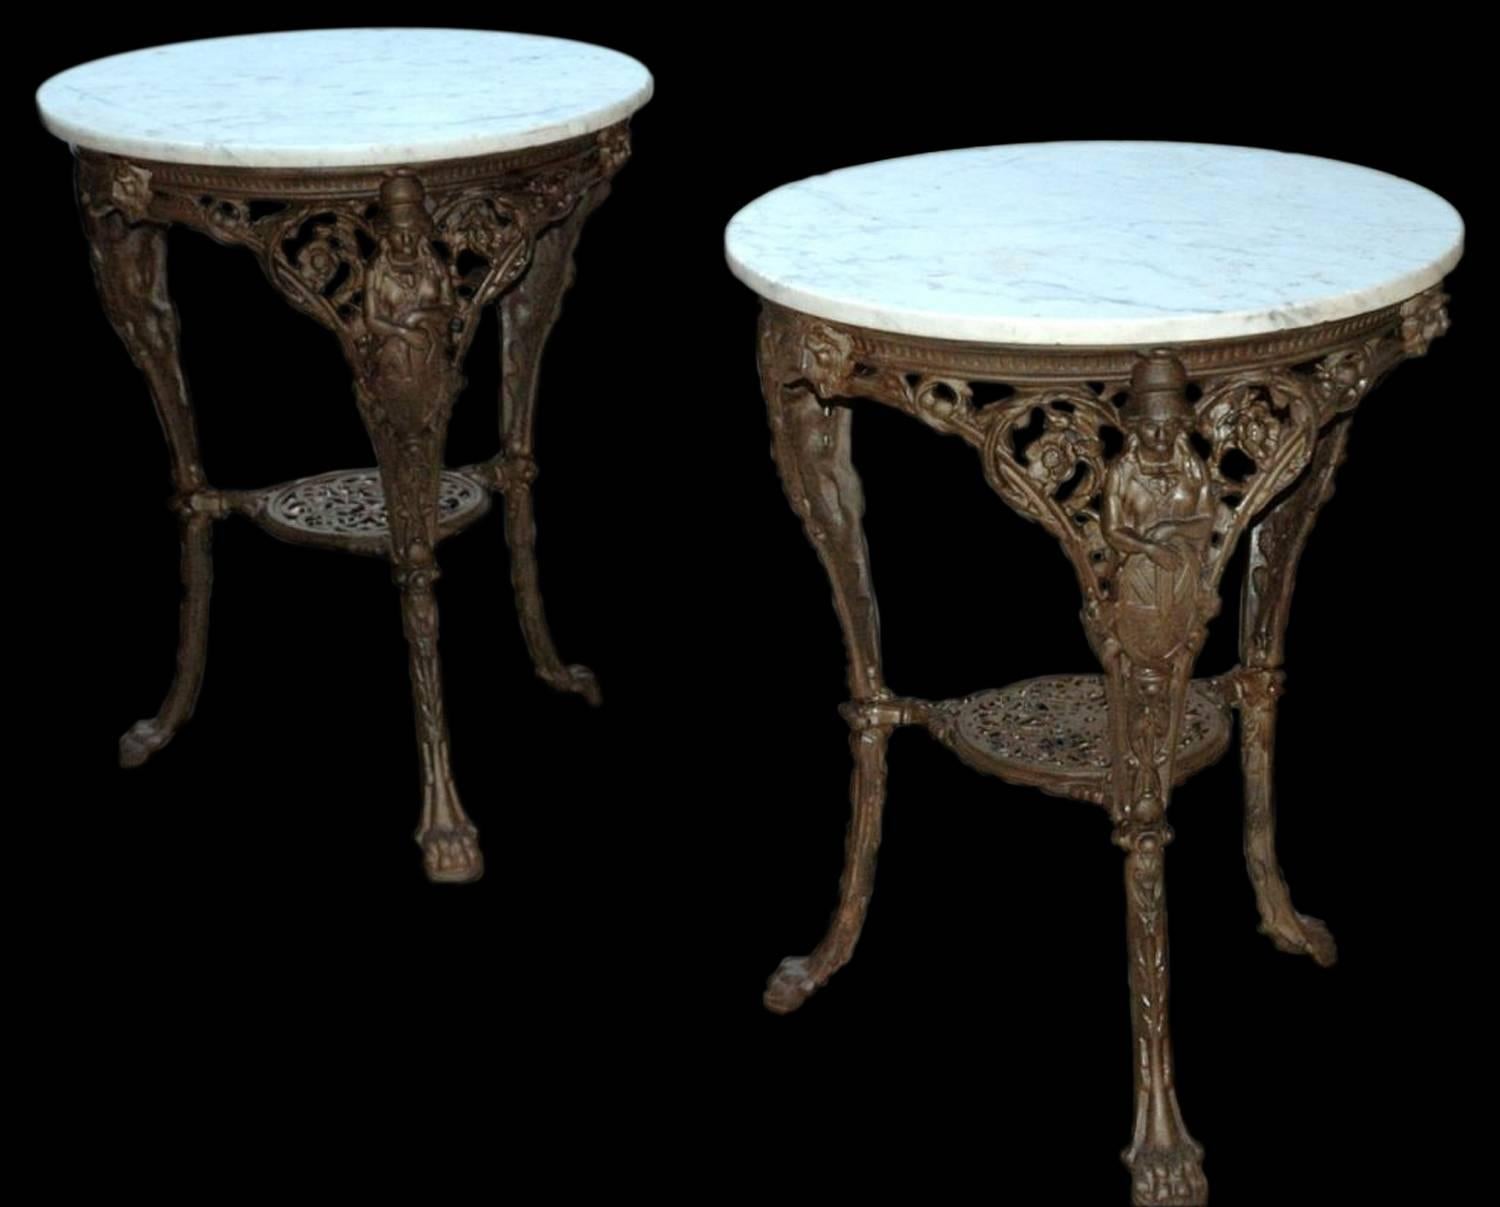 French, circa 1880's cast iron figural garden tables. The tables have round marble tops and cast iron bases. They could function well indoors as side tables or outdoors as garden tables. Each leg is adorned with a woman holding a shield terminating